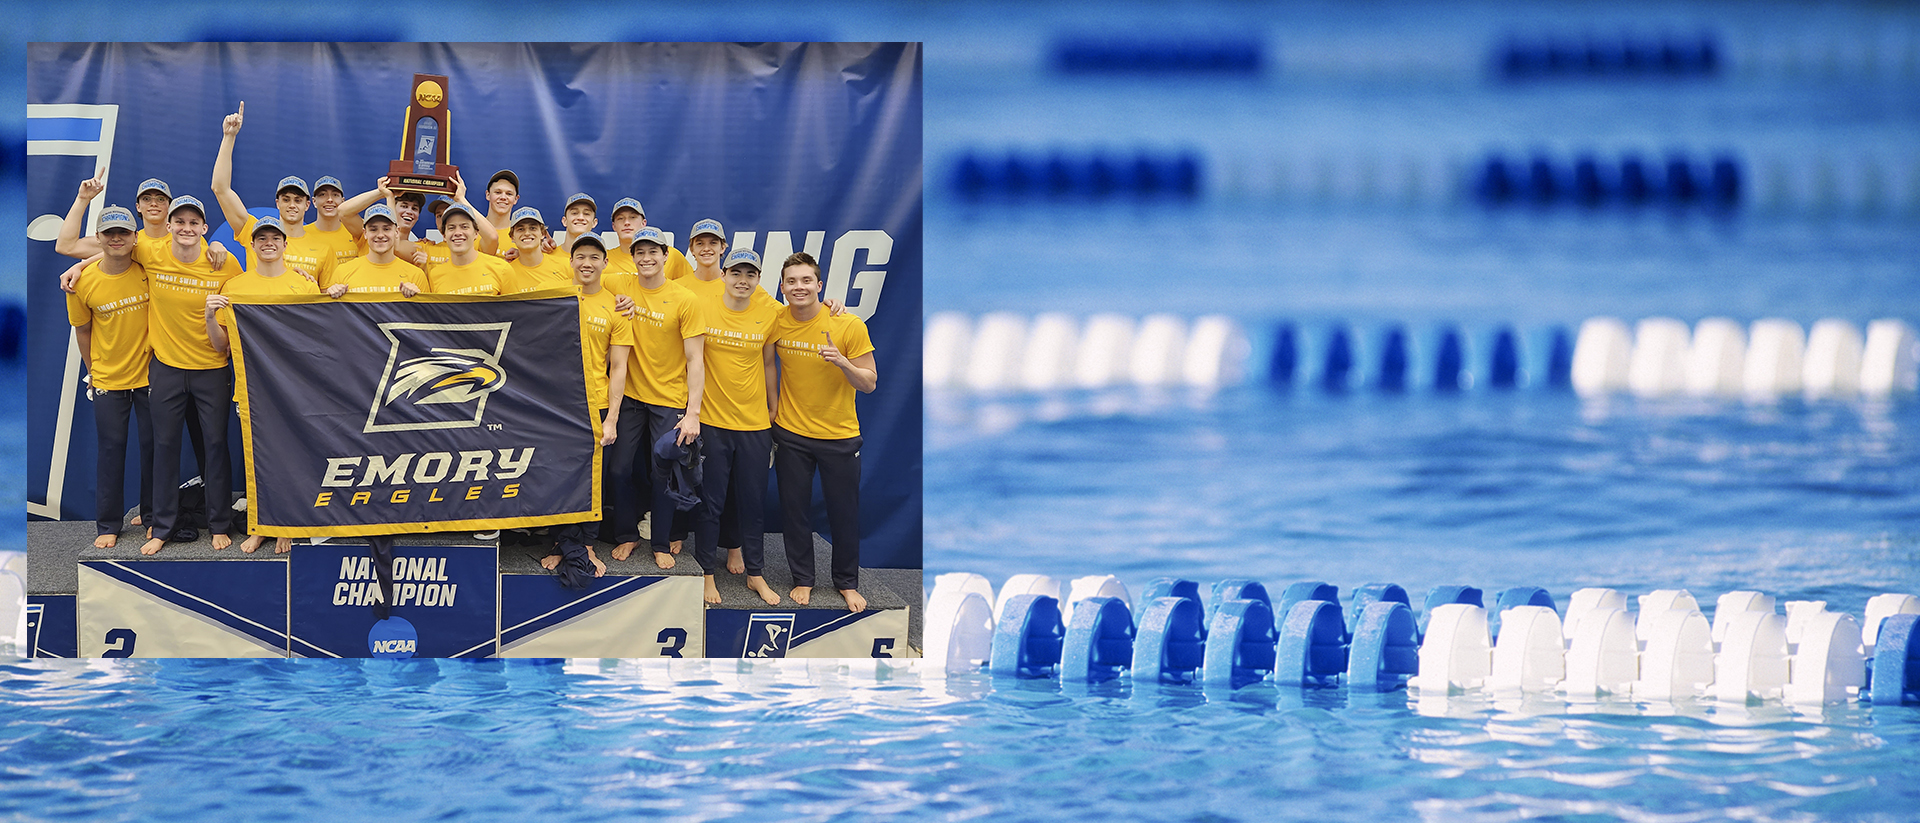 The swimming and diving team poses on the podium holding up the NCAA Championship trophy